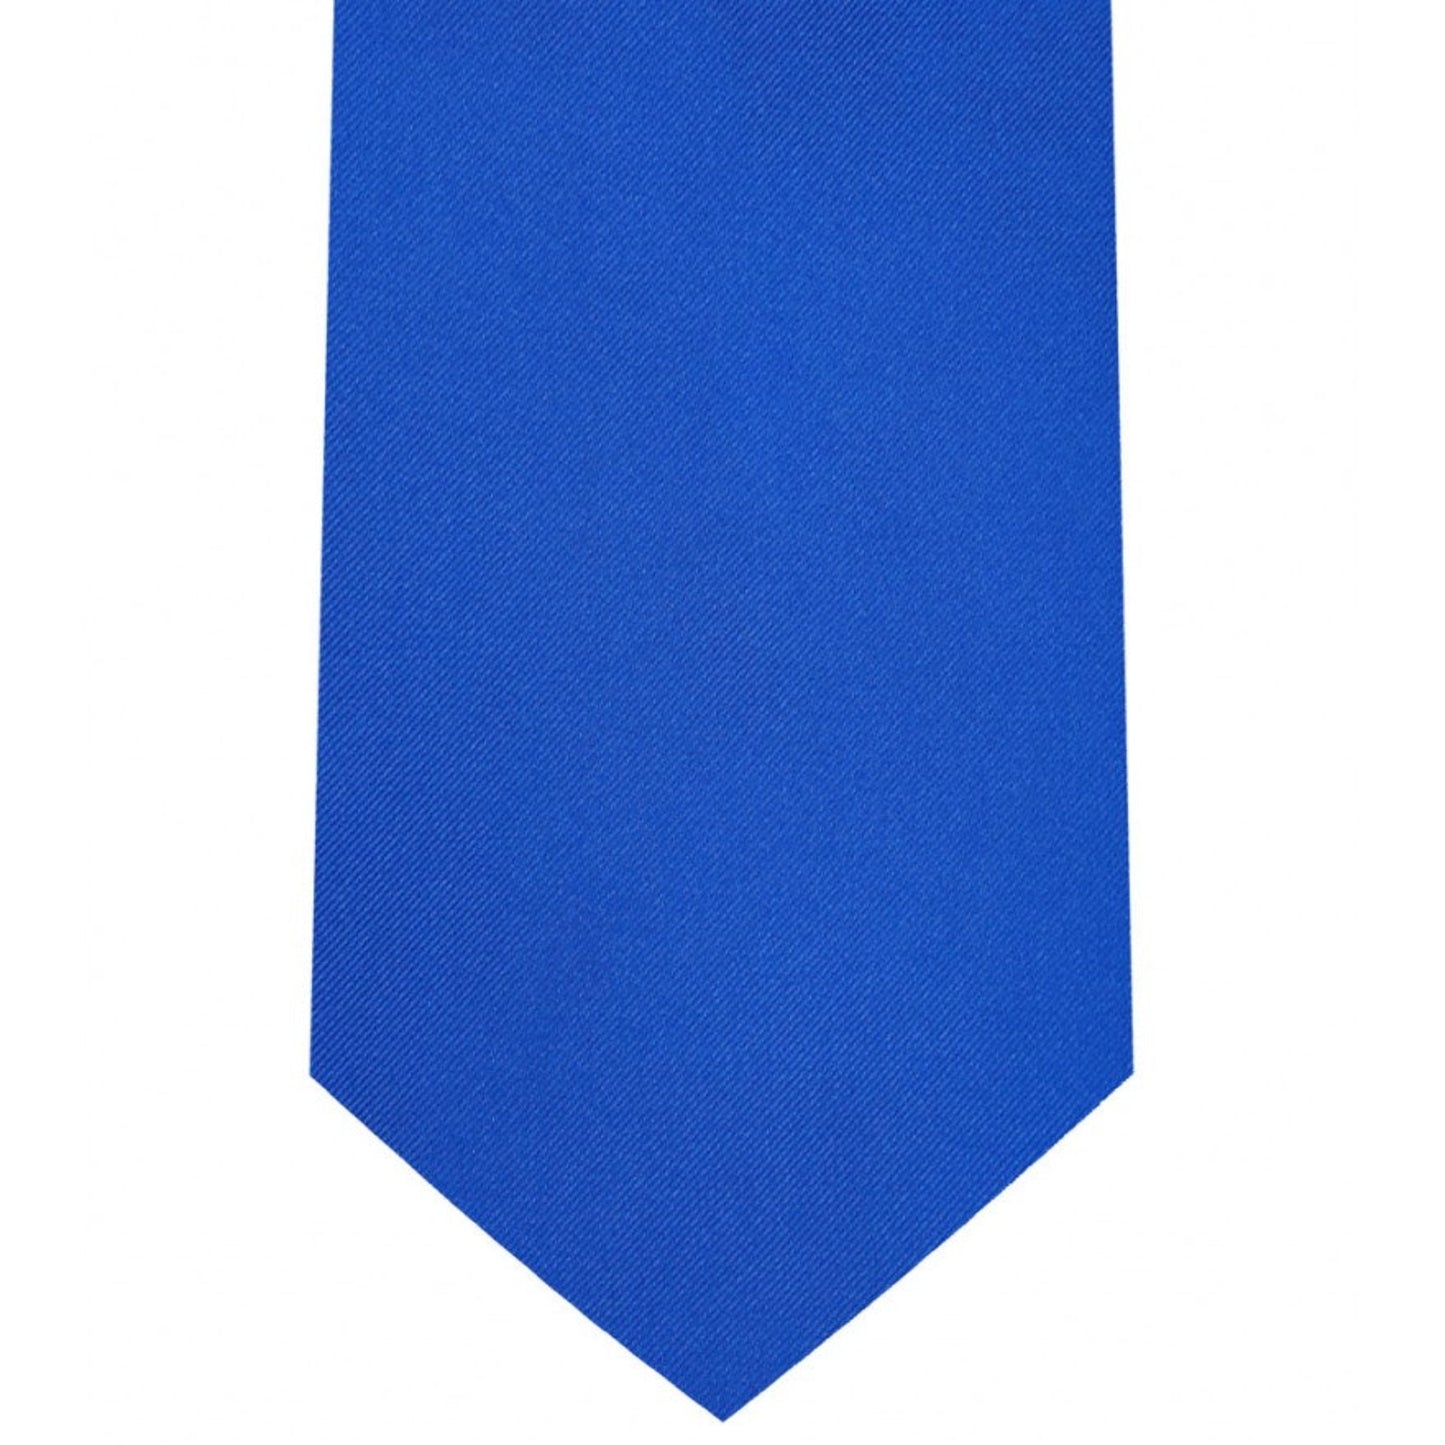 Classic Royal Blue Tie Regular width 3.5 inches With Matching Pocket Square | KCT Menswear 